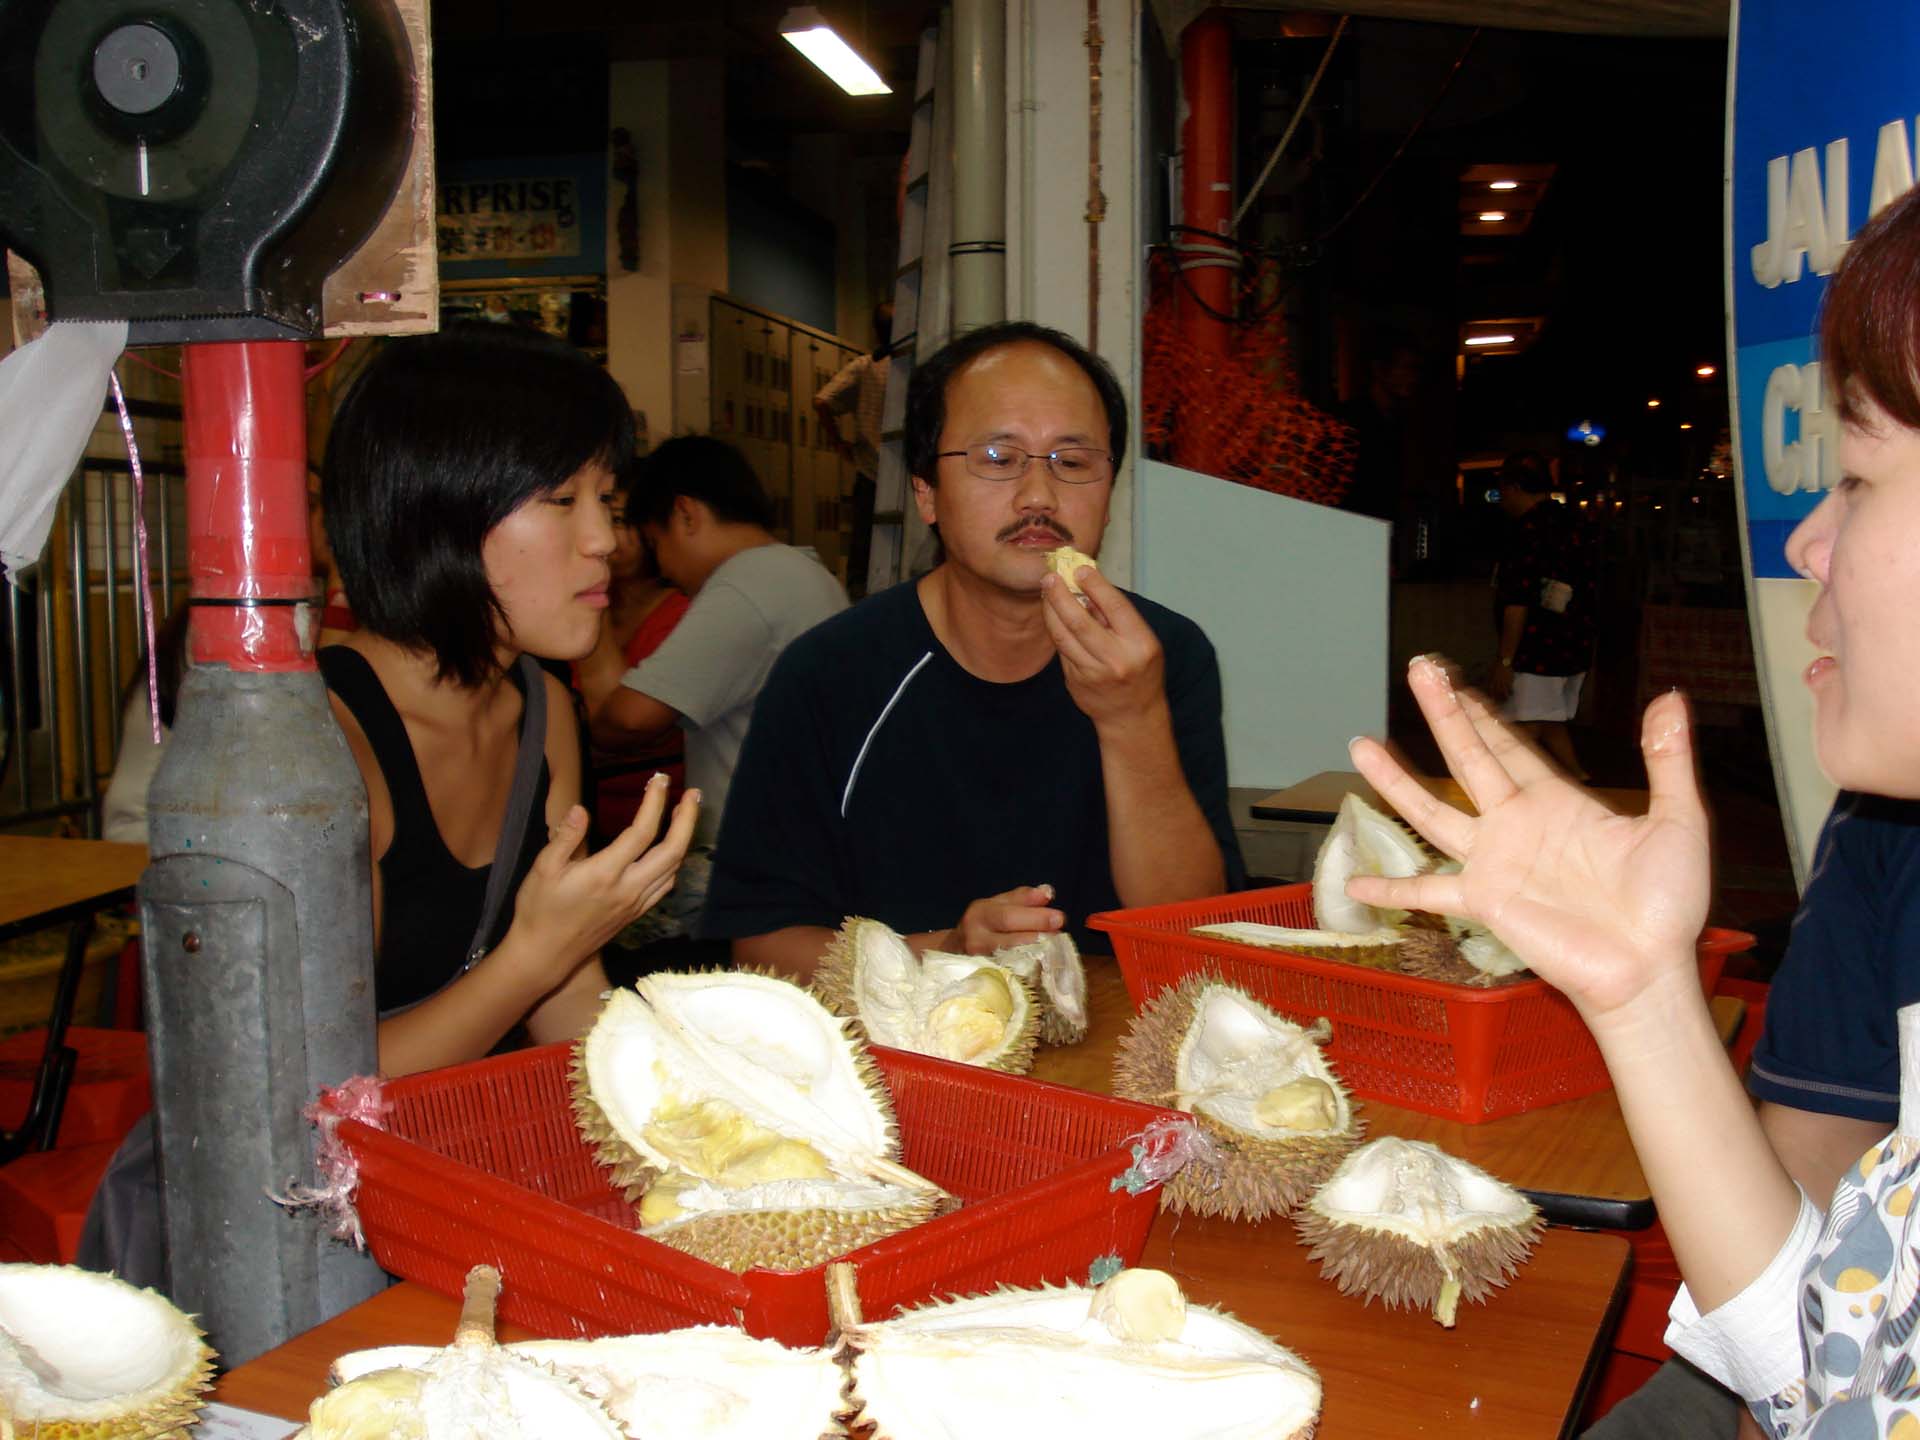 Durian eaters hold up sticky fingers at a durian stall in Singapore.